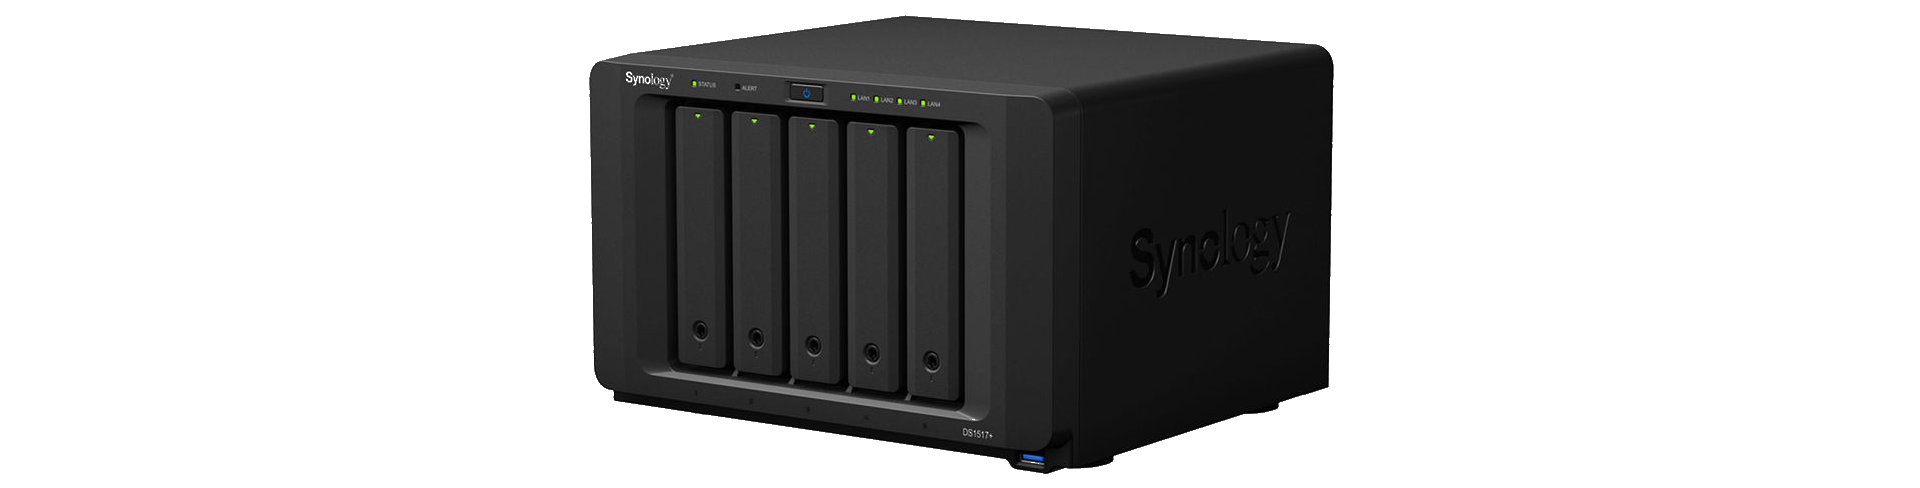 synology_ds1517_8gb_ds1517_5_bay_nas_8gb_1334349.png